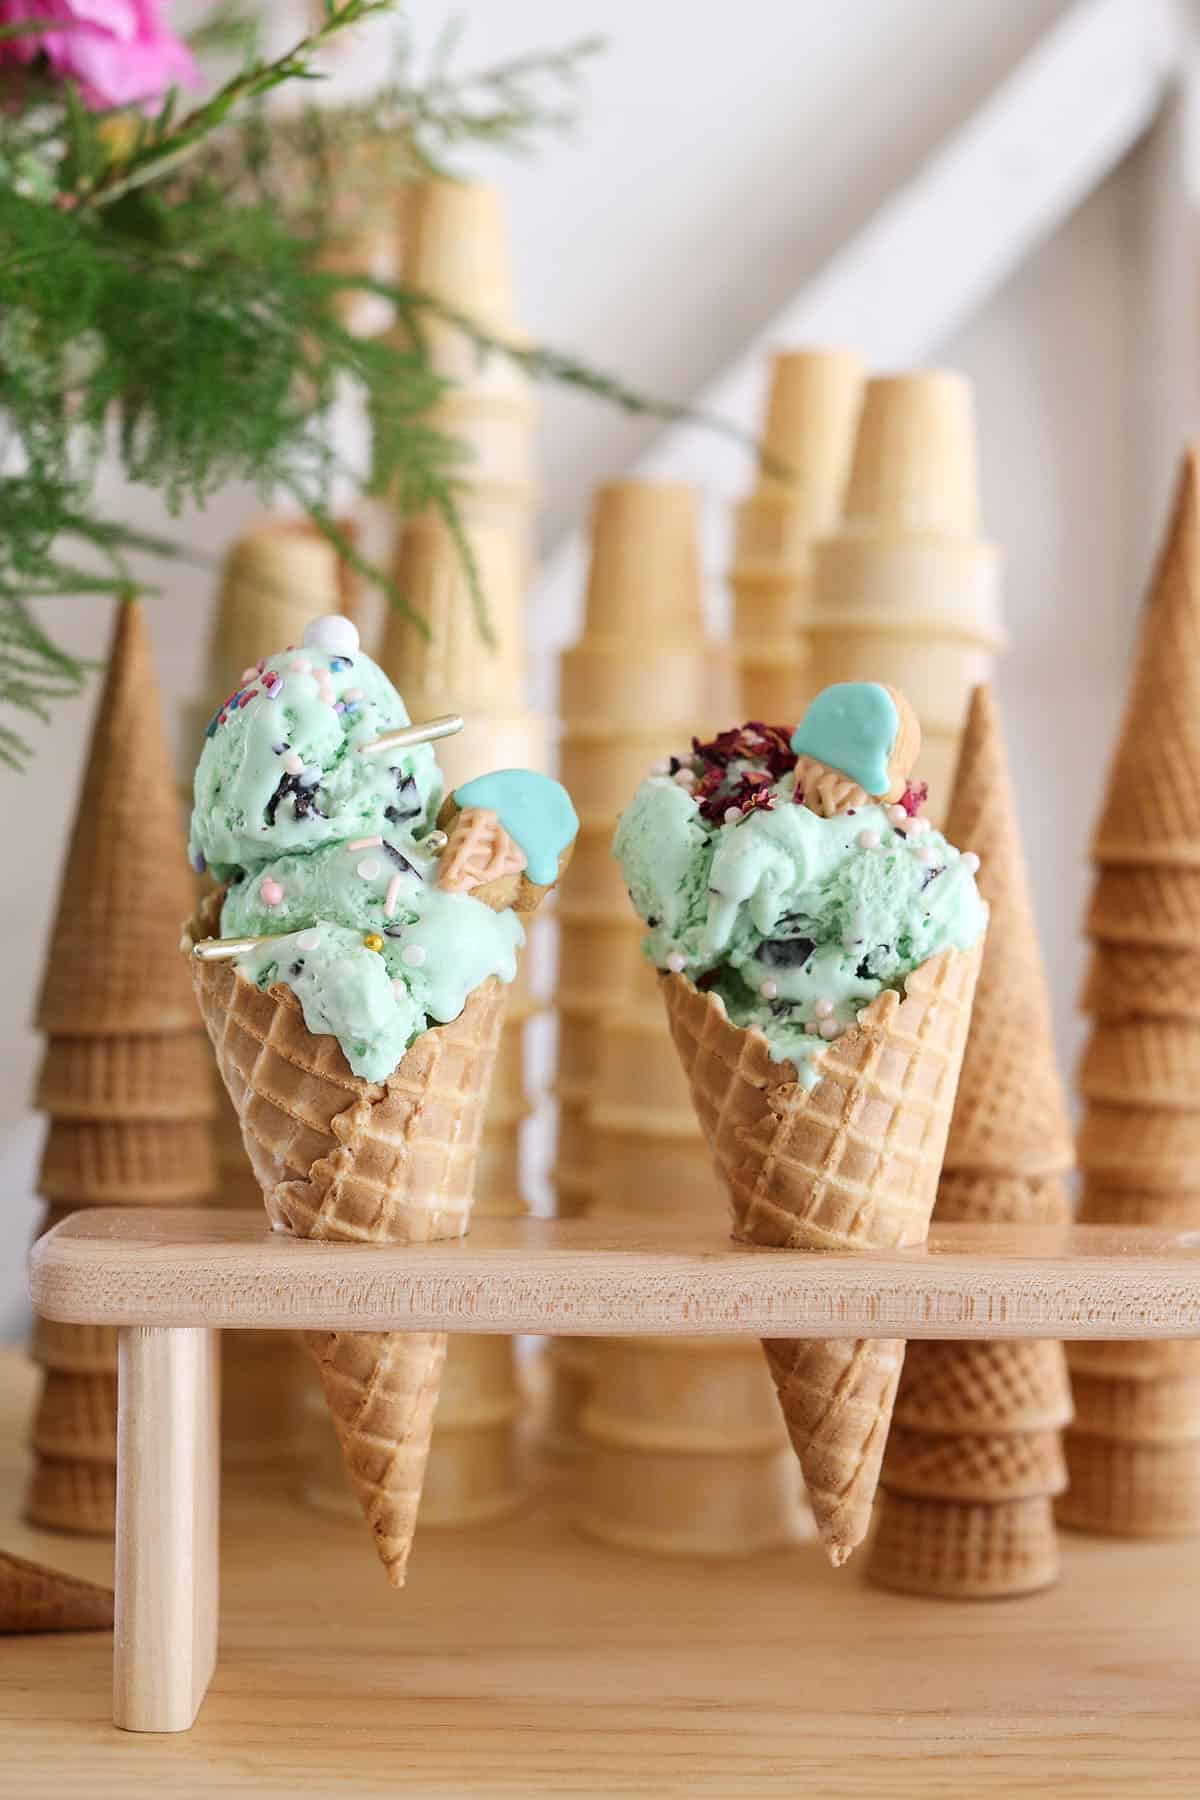 Ice cream cones in a wooden holder on a bar